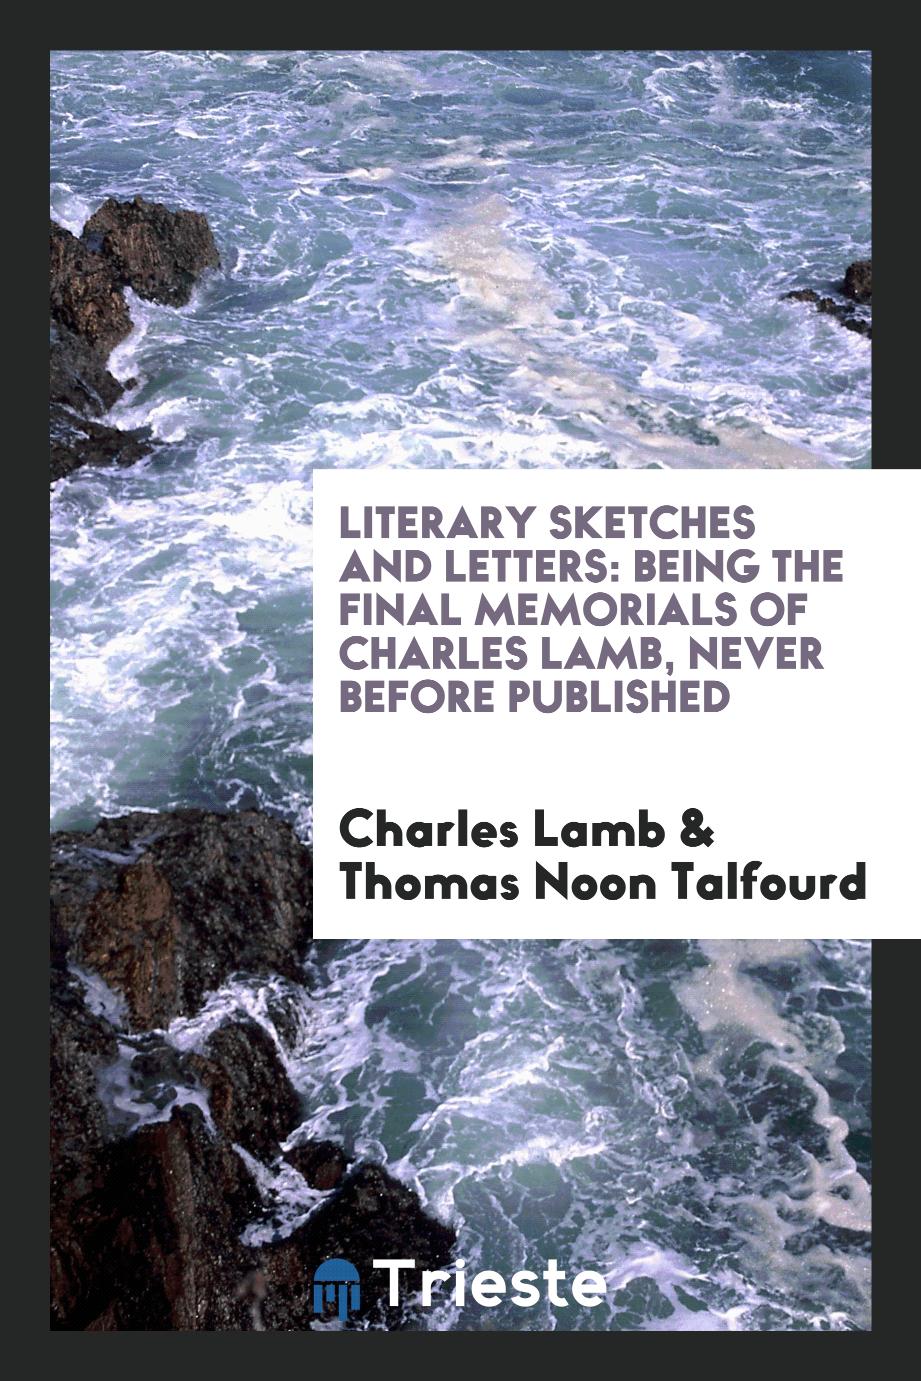 Literary sketches and letters: being the final memorials of Charles Lamb, never before published